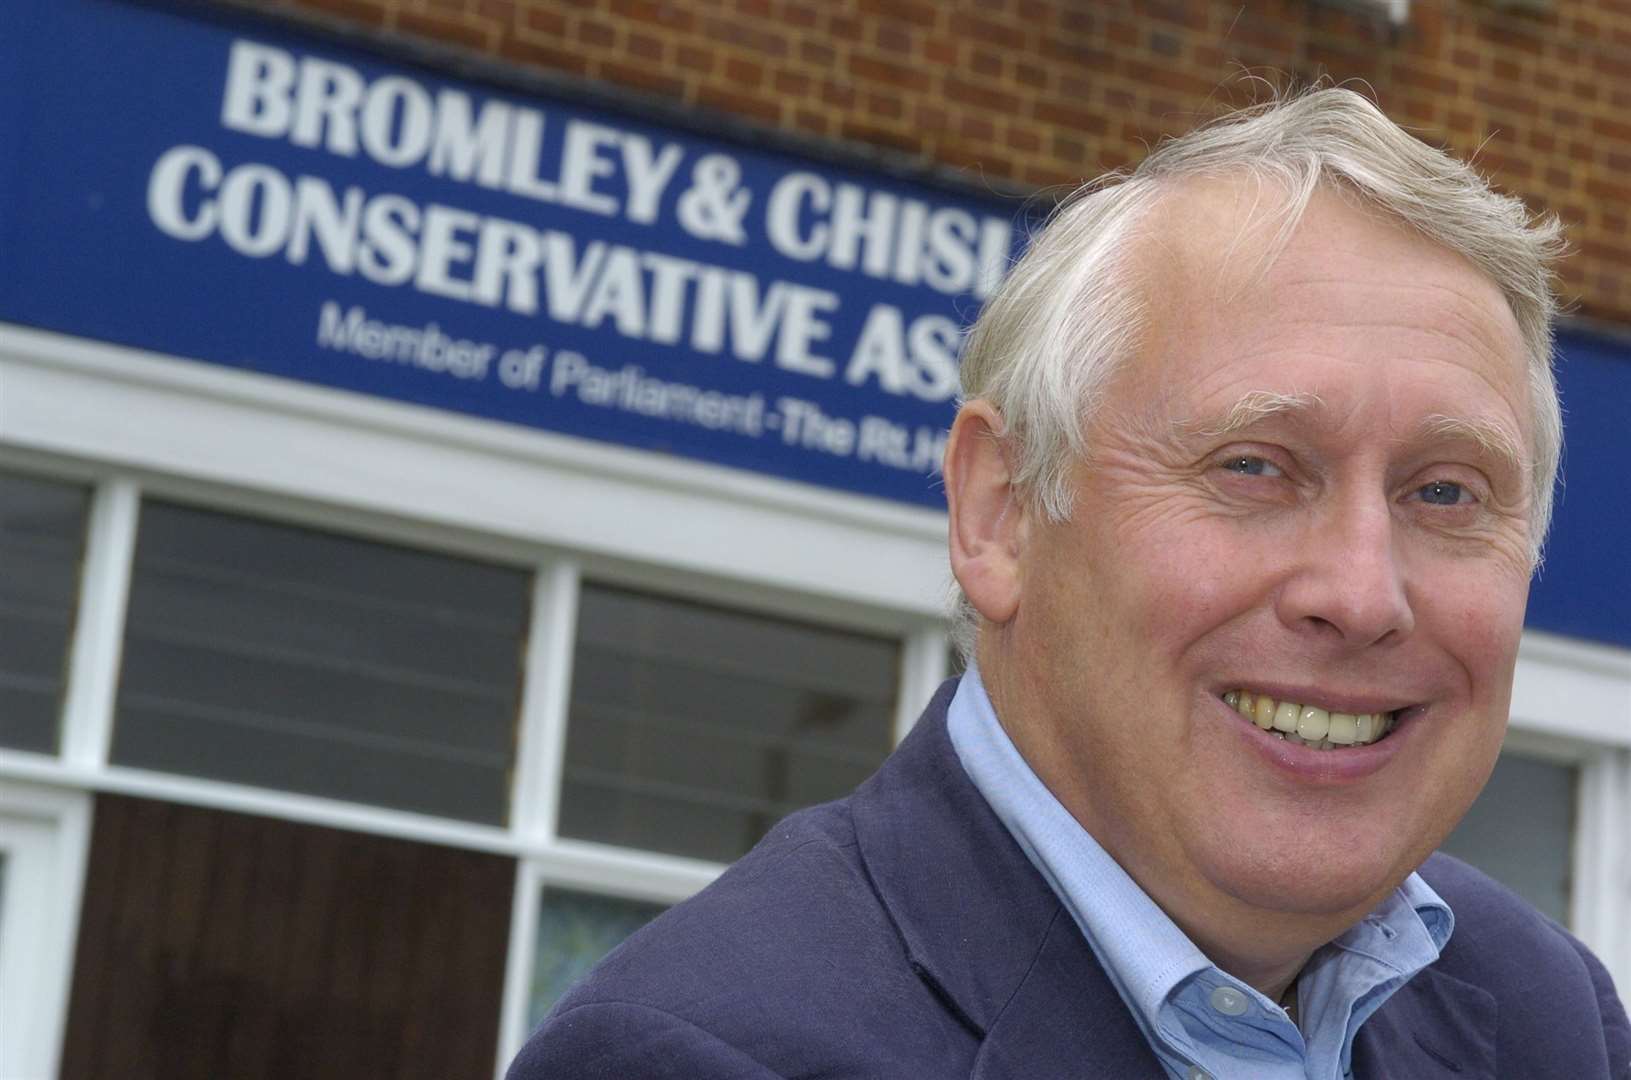 Bob Neill is Conservative MP for Bromley and Chislehurst